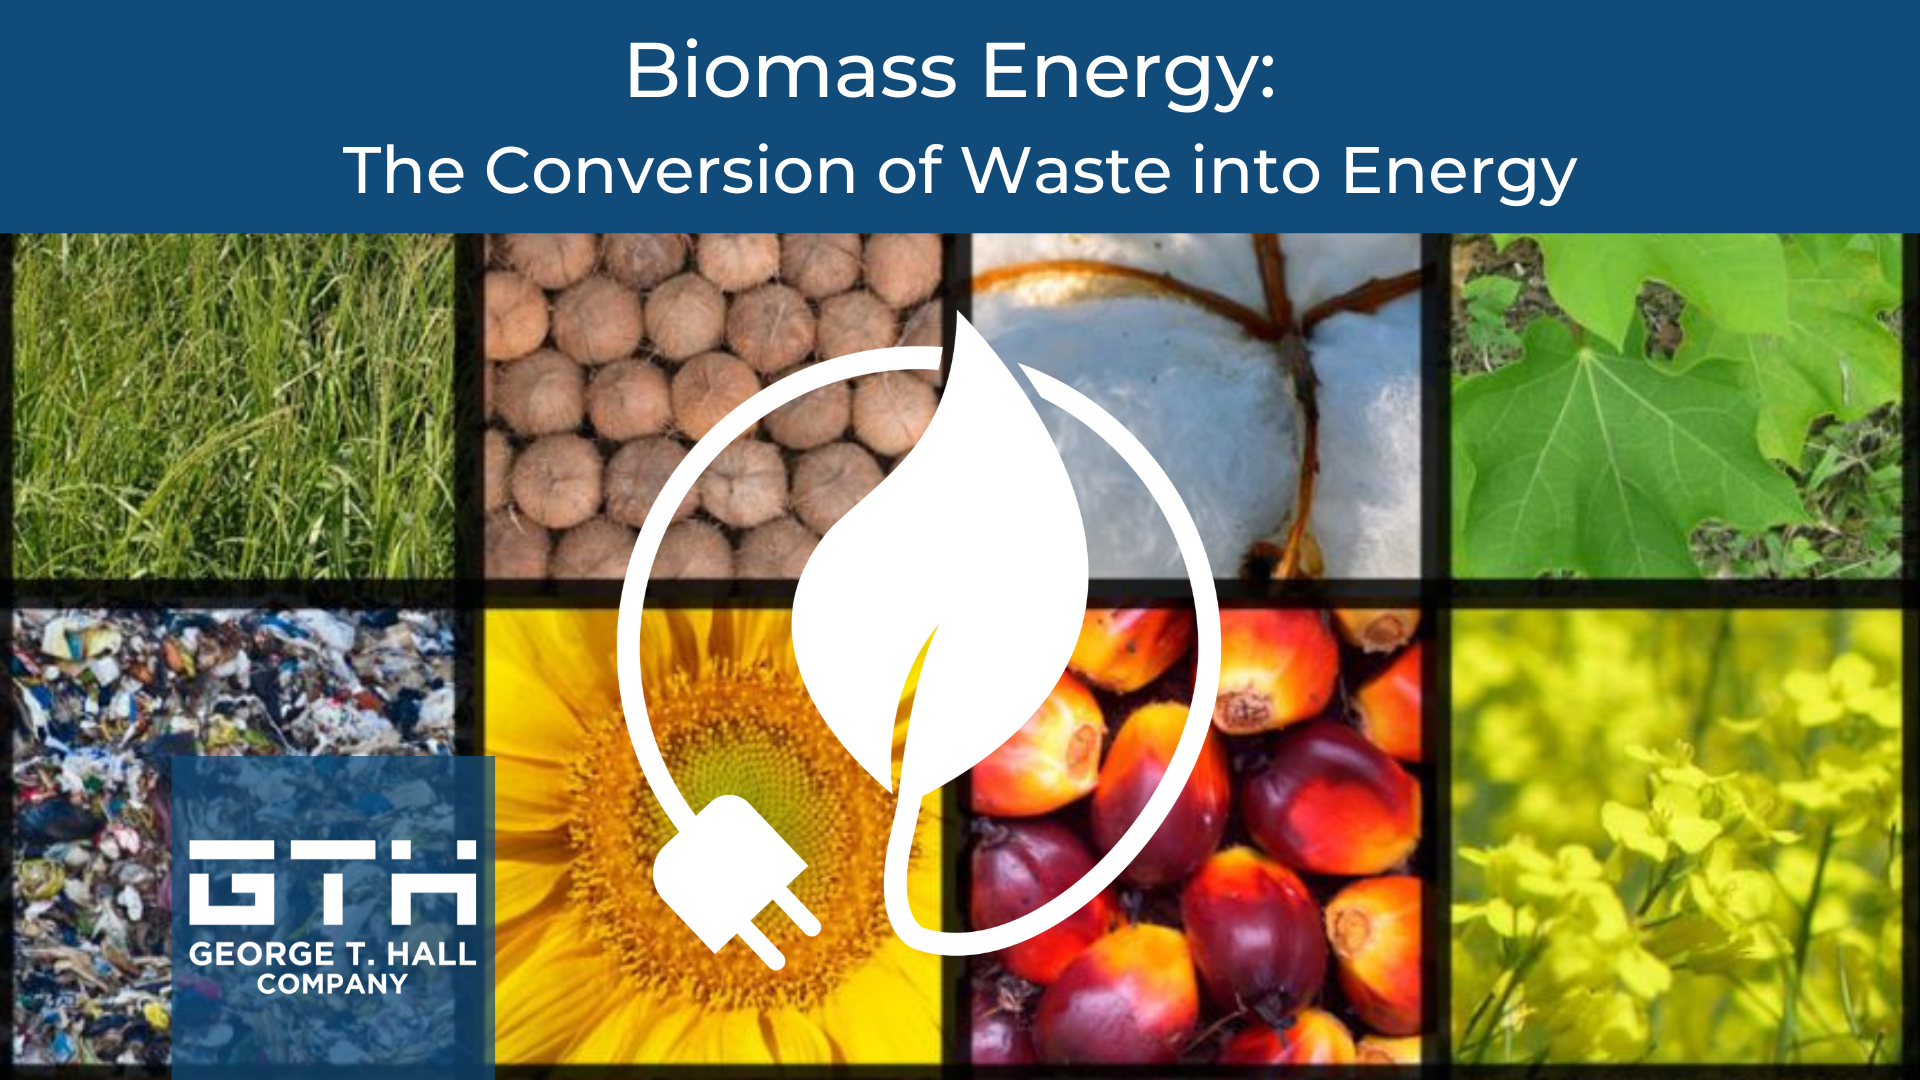 Biomass Energy: the conversion of waste into energy